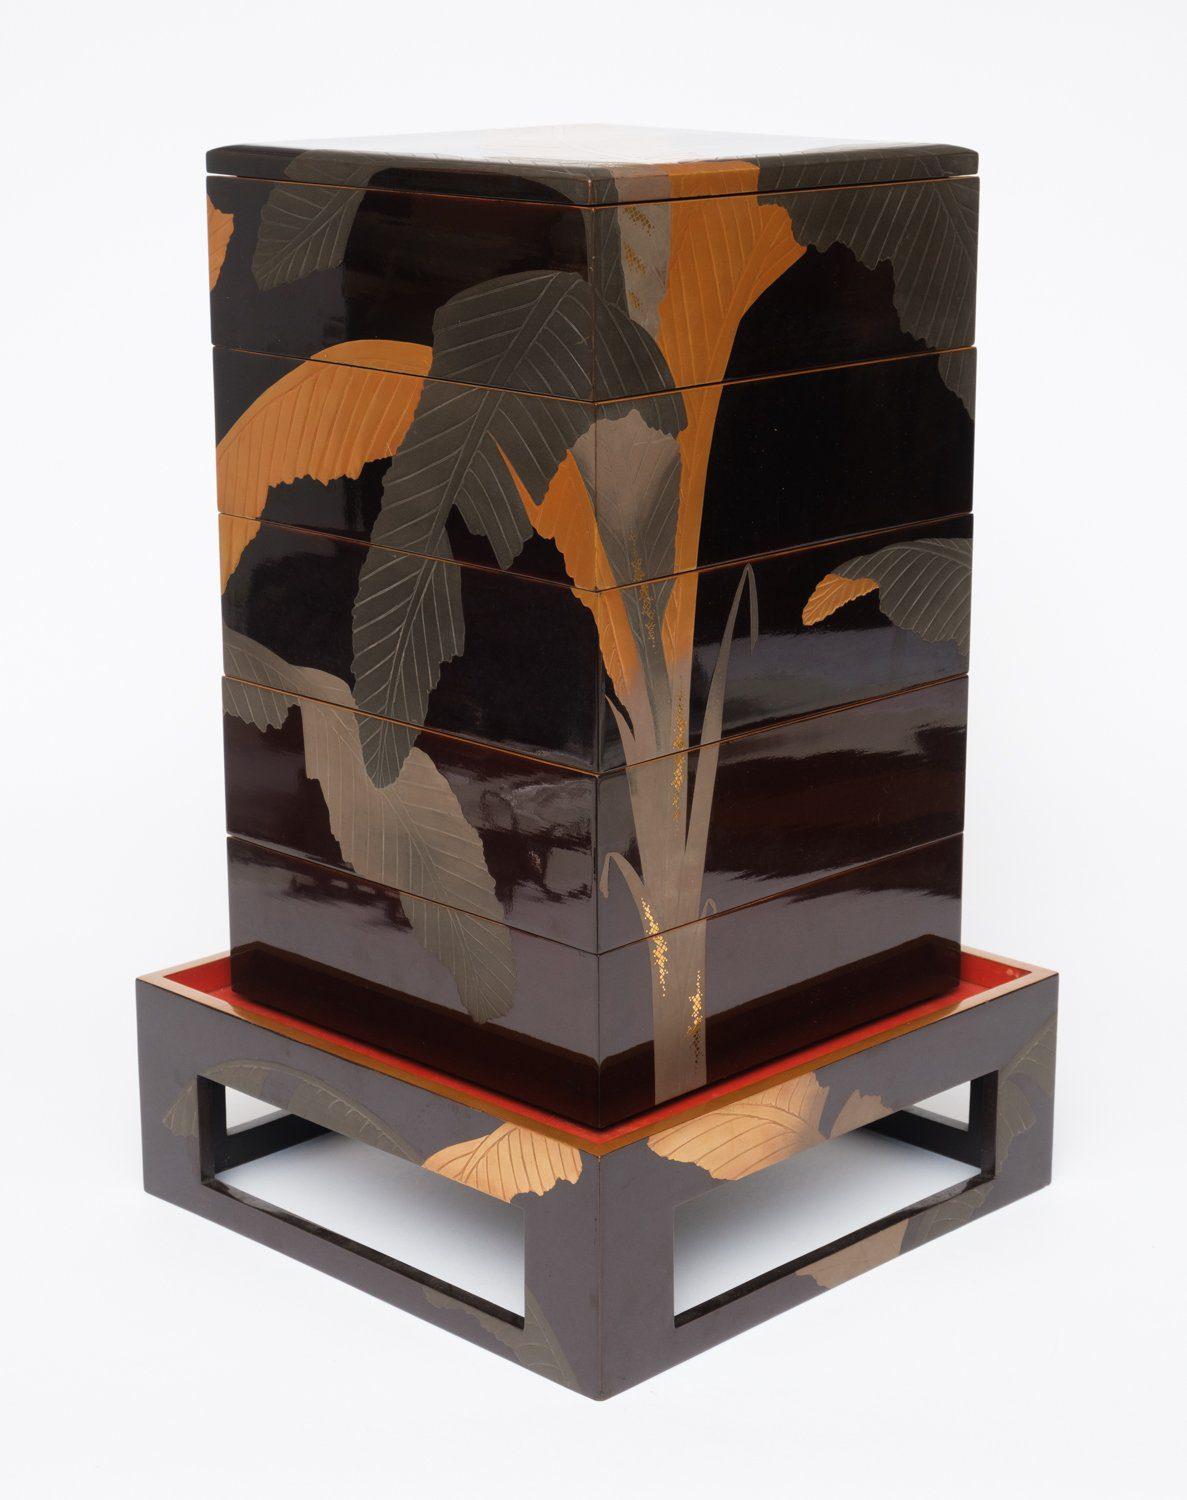 Japanese lacquered 5-tiered jûbako 重箱 (picnic box) with banana leaf design For Sale 11